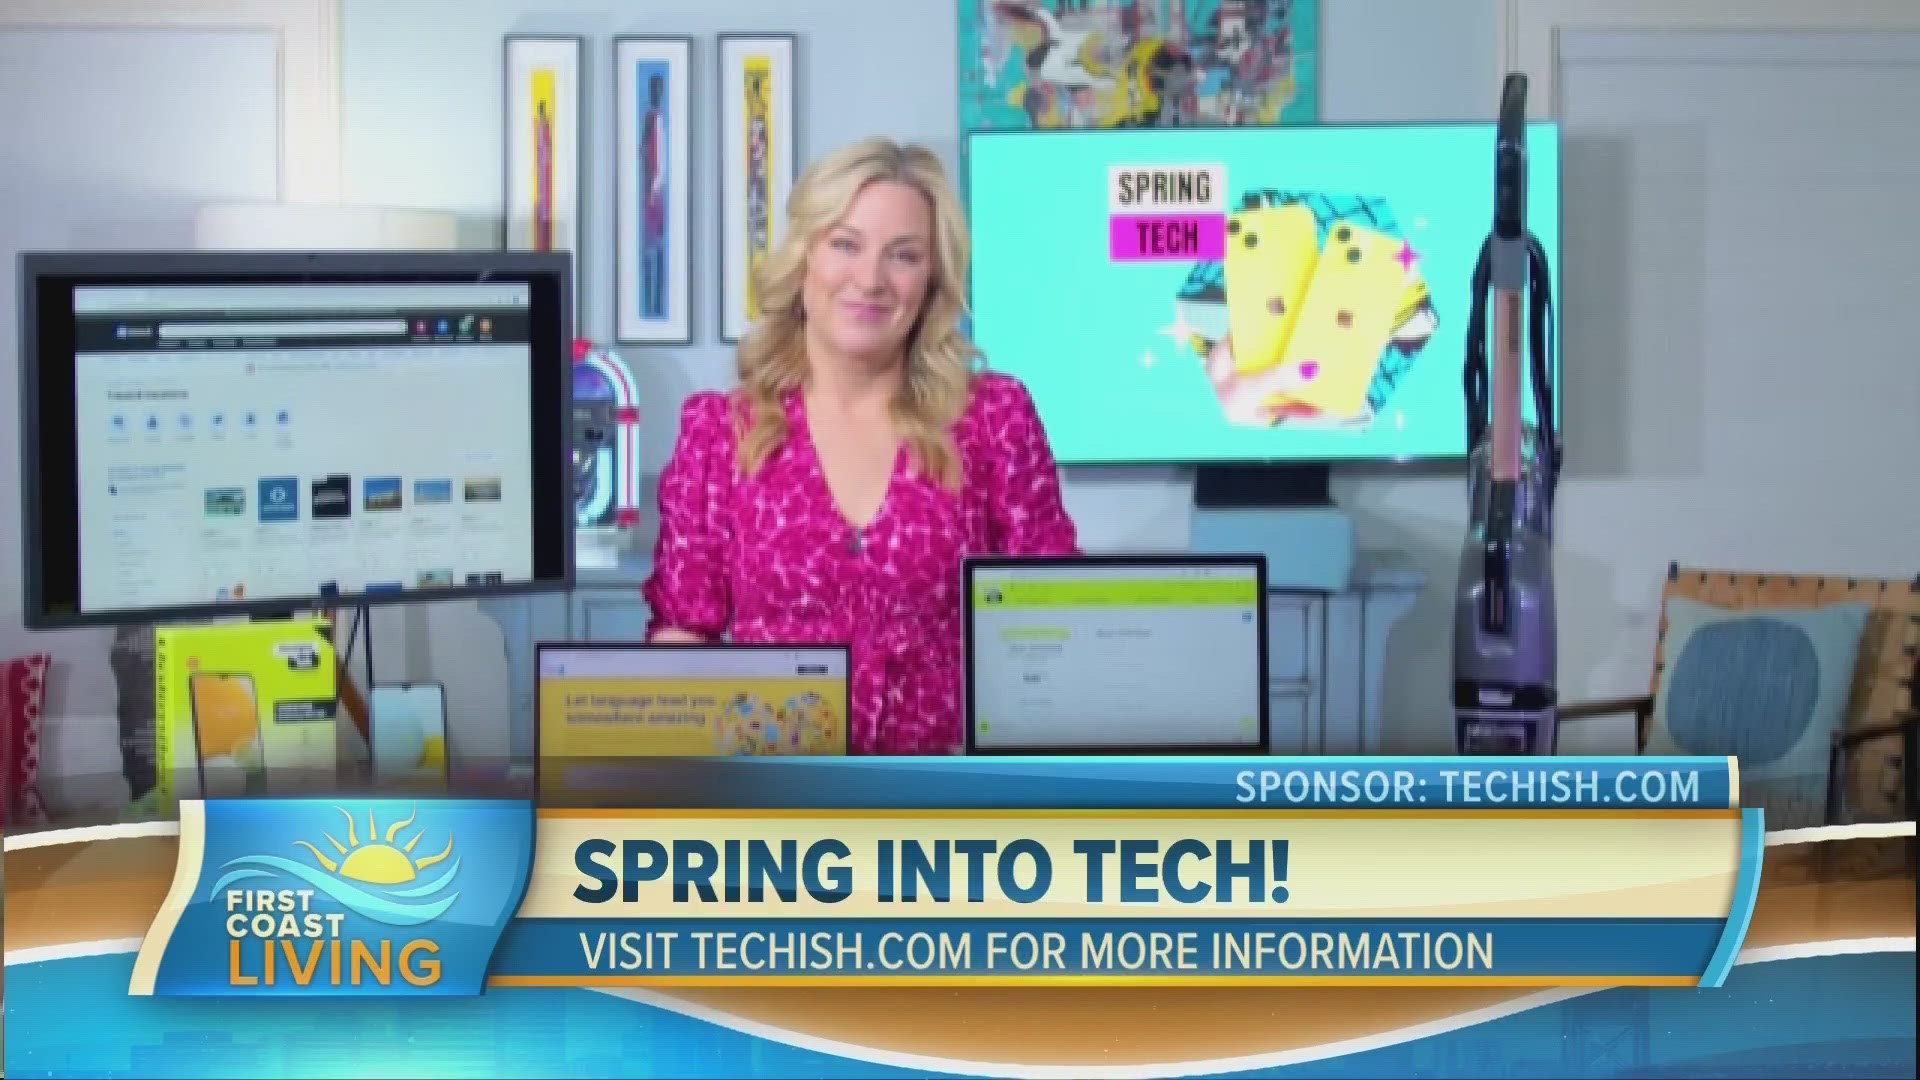 Gadget-guru, Jennifer Jolly shares trending tech while offering tips and tricks to make your spring more memorable (in a good way).